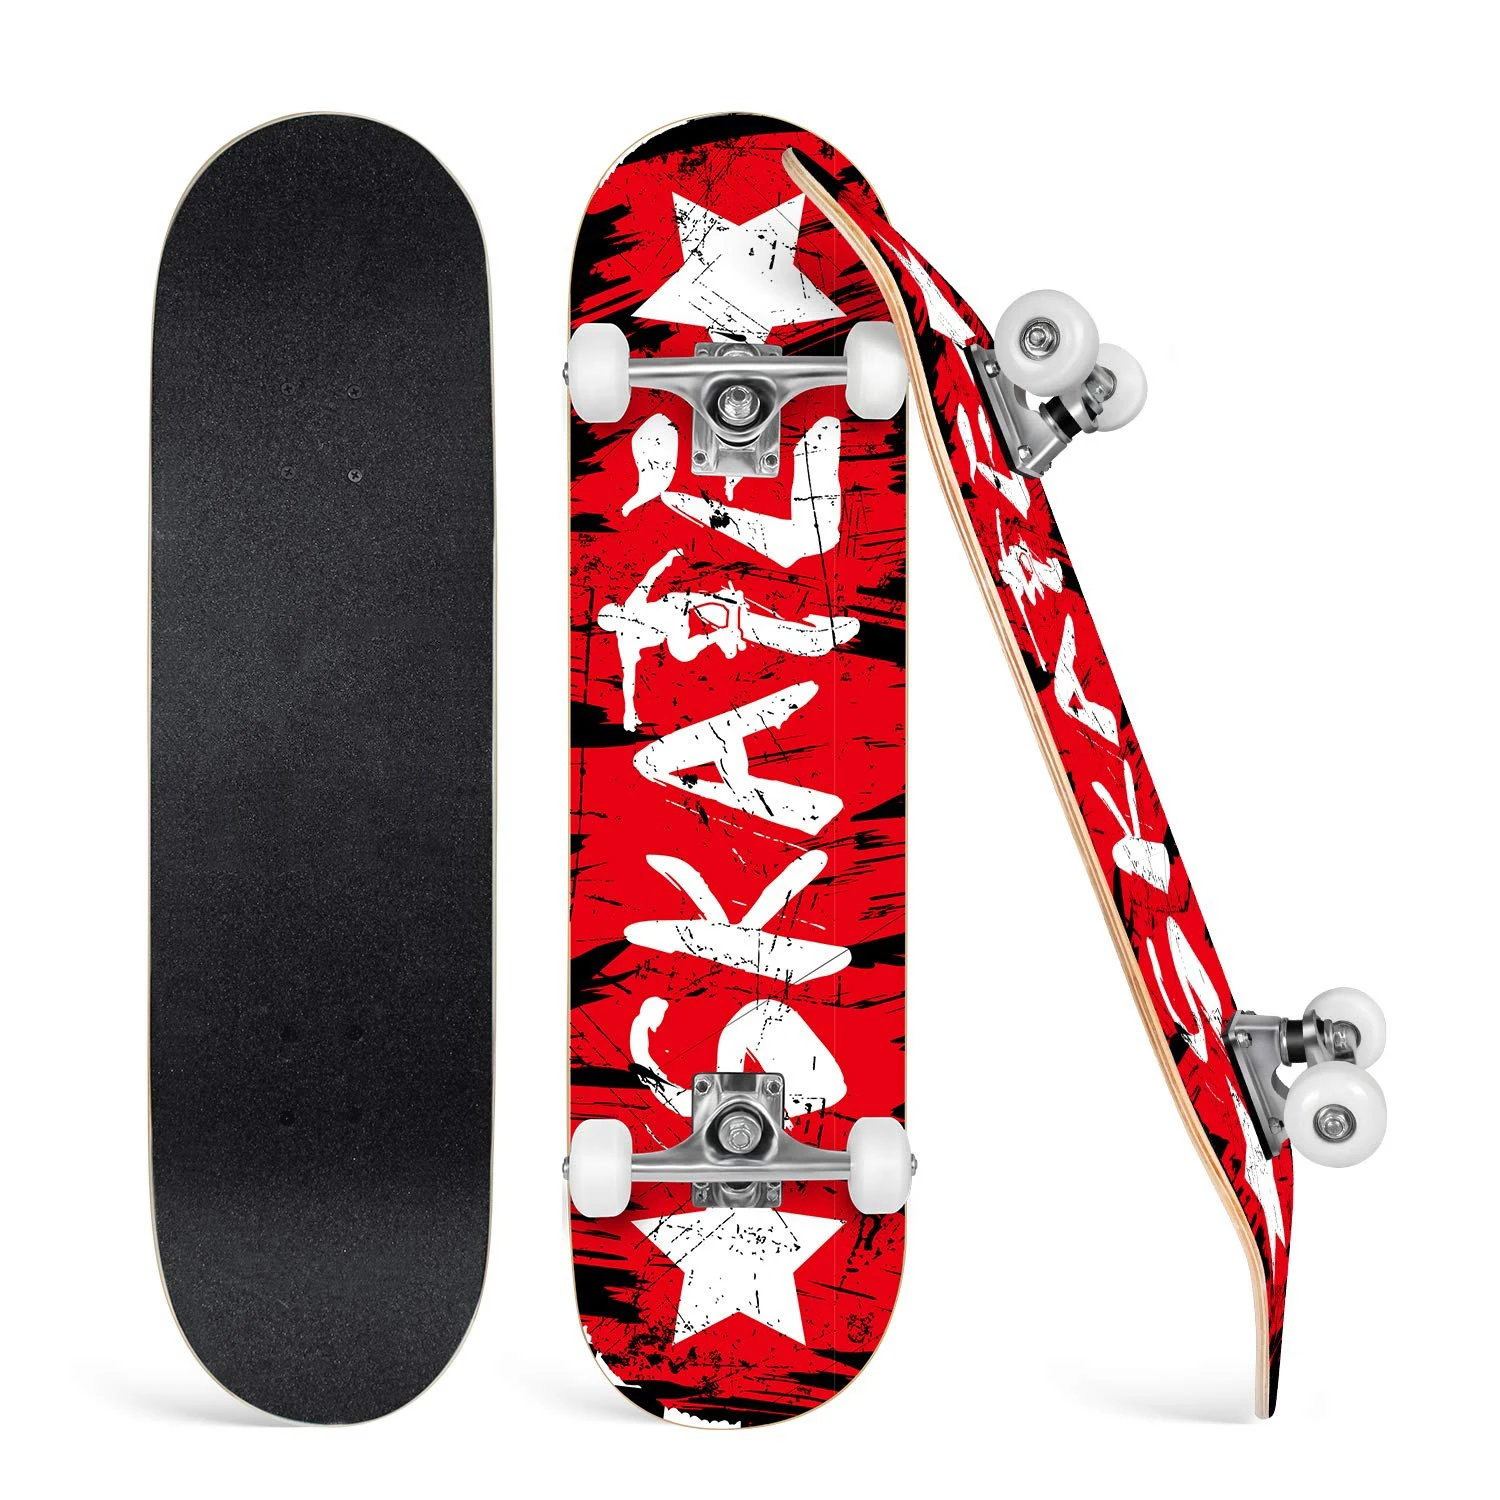 

Skateboard for Kids Teens Adults, 31 inch Complete Standard Skateboards for Beginners Girls Boys, 7 Layer Maple Double Kick Deck